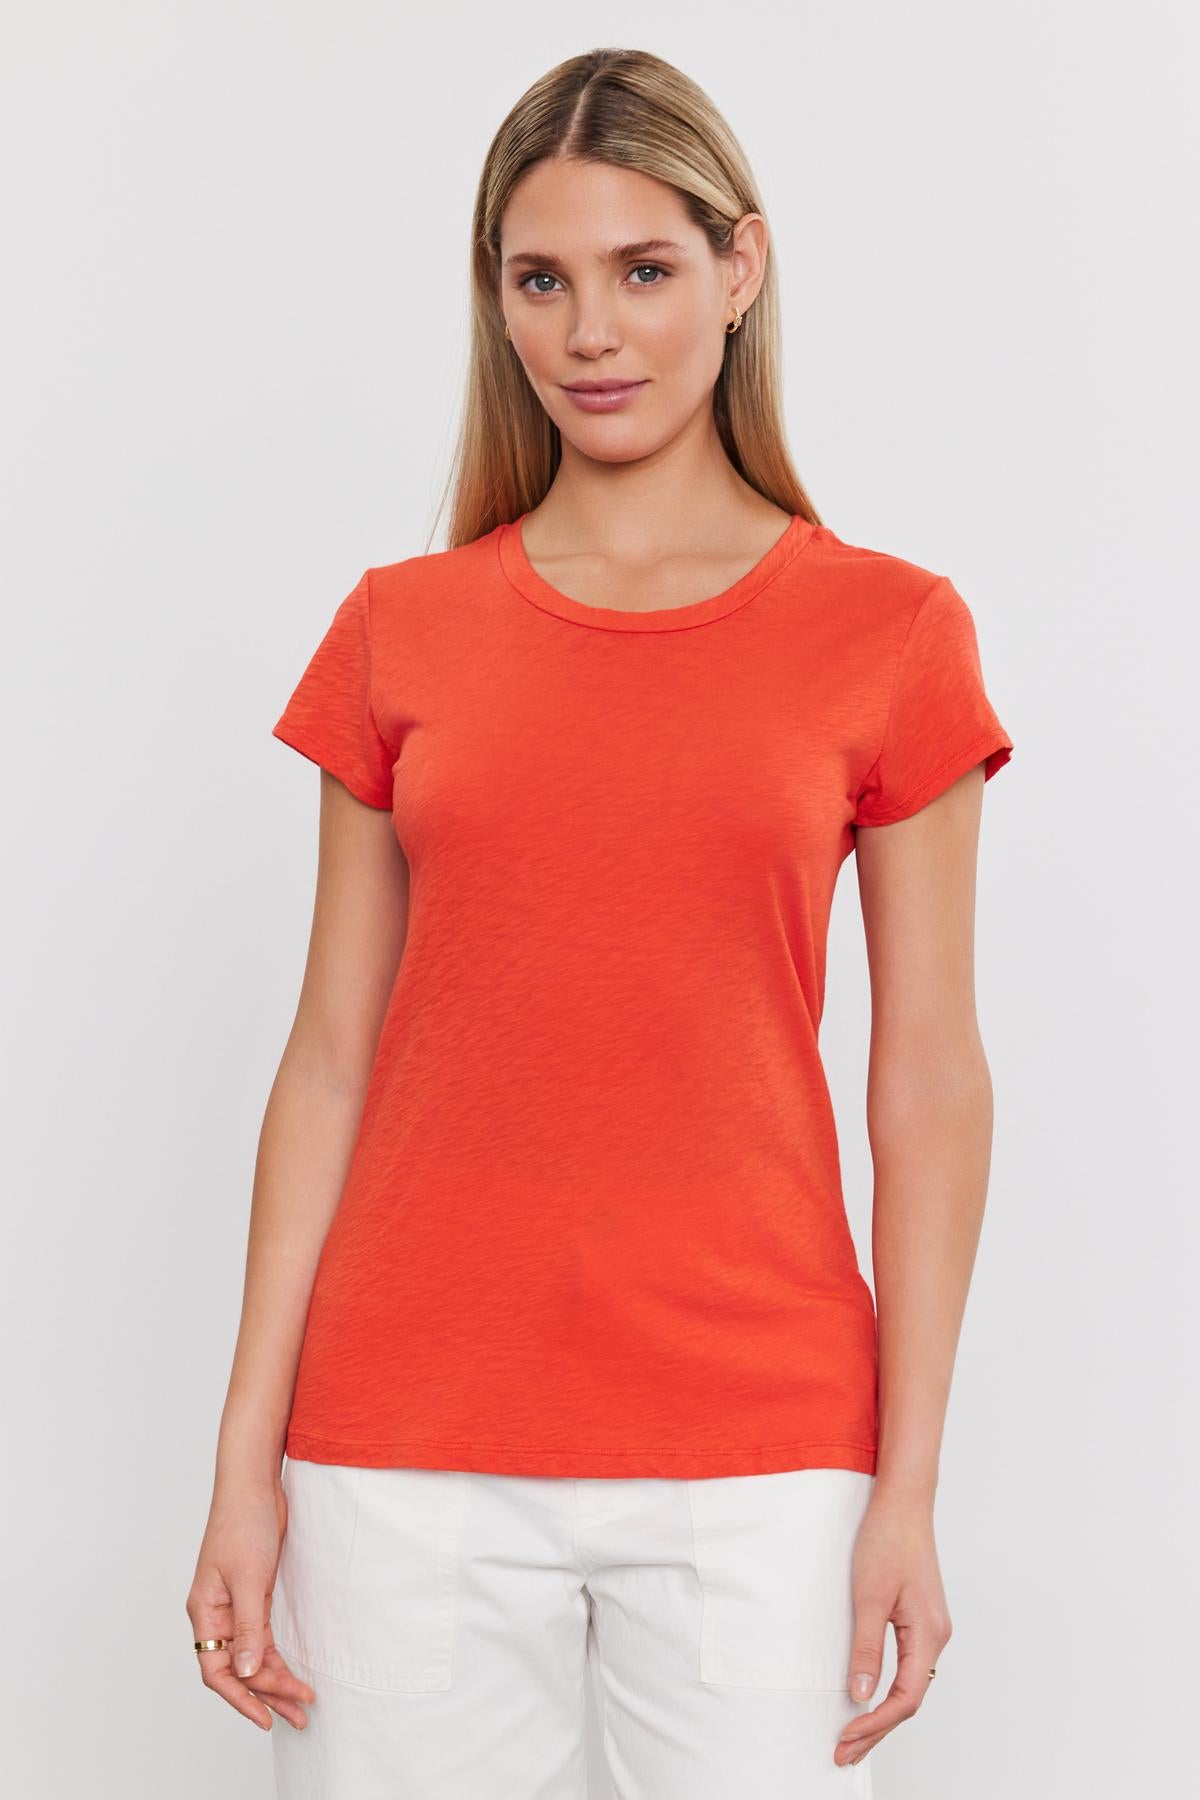 A woman standing against a white background, wearing a bright orange ODELIA COTTON SLUB CREW NECK TEE from Velvet by Graham & Spencer and white pants, looking directly at the camera.-36910072430785